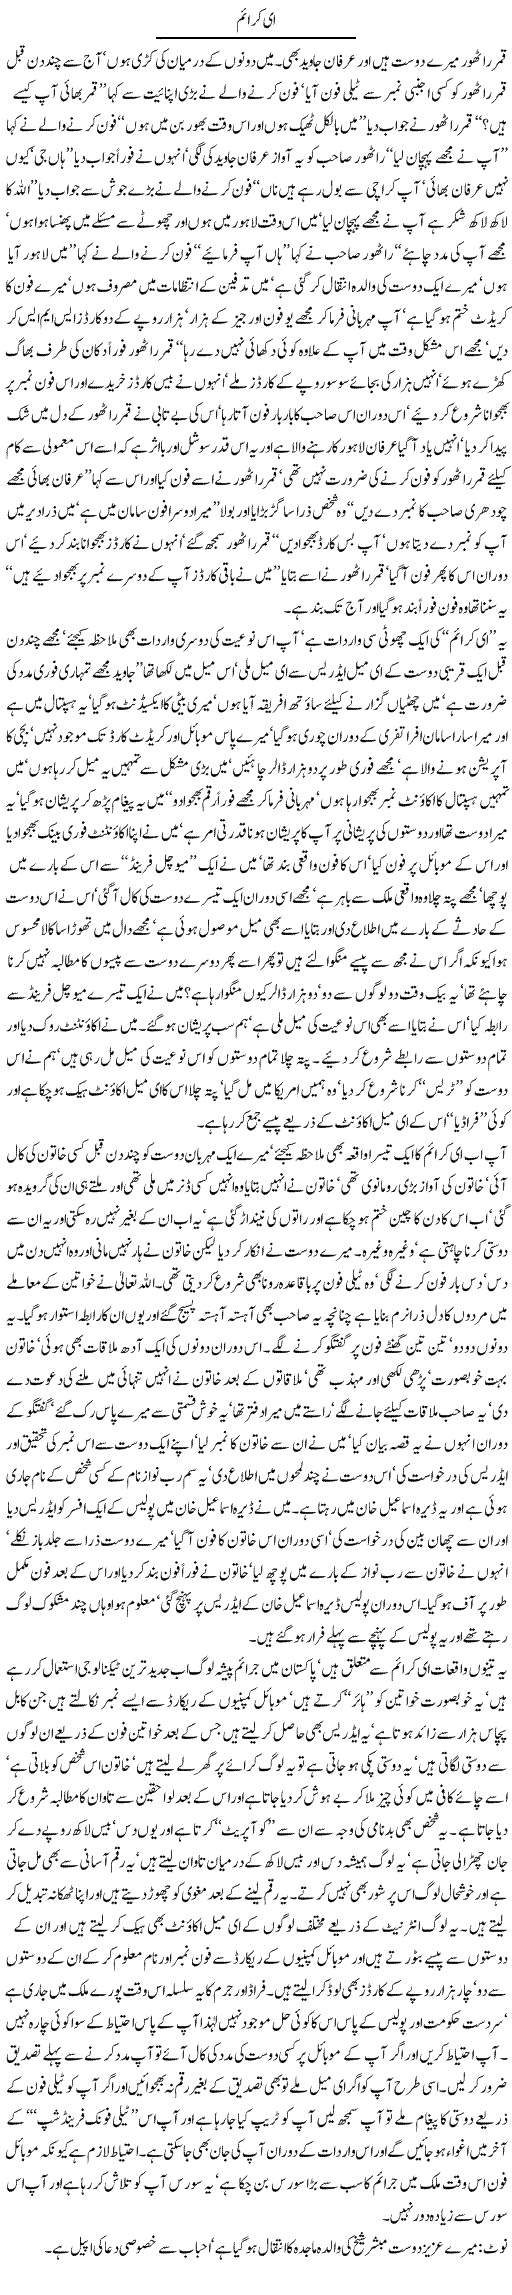 Electronic Crimes Express Column Javed Chaudhry 31 July 2011